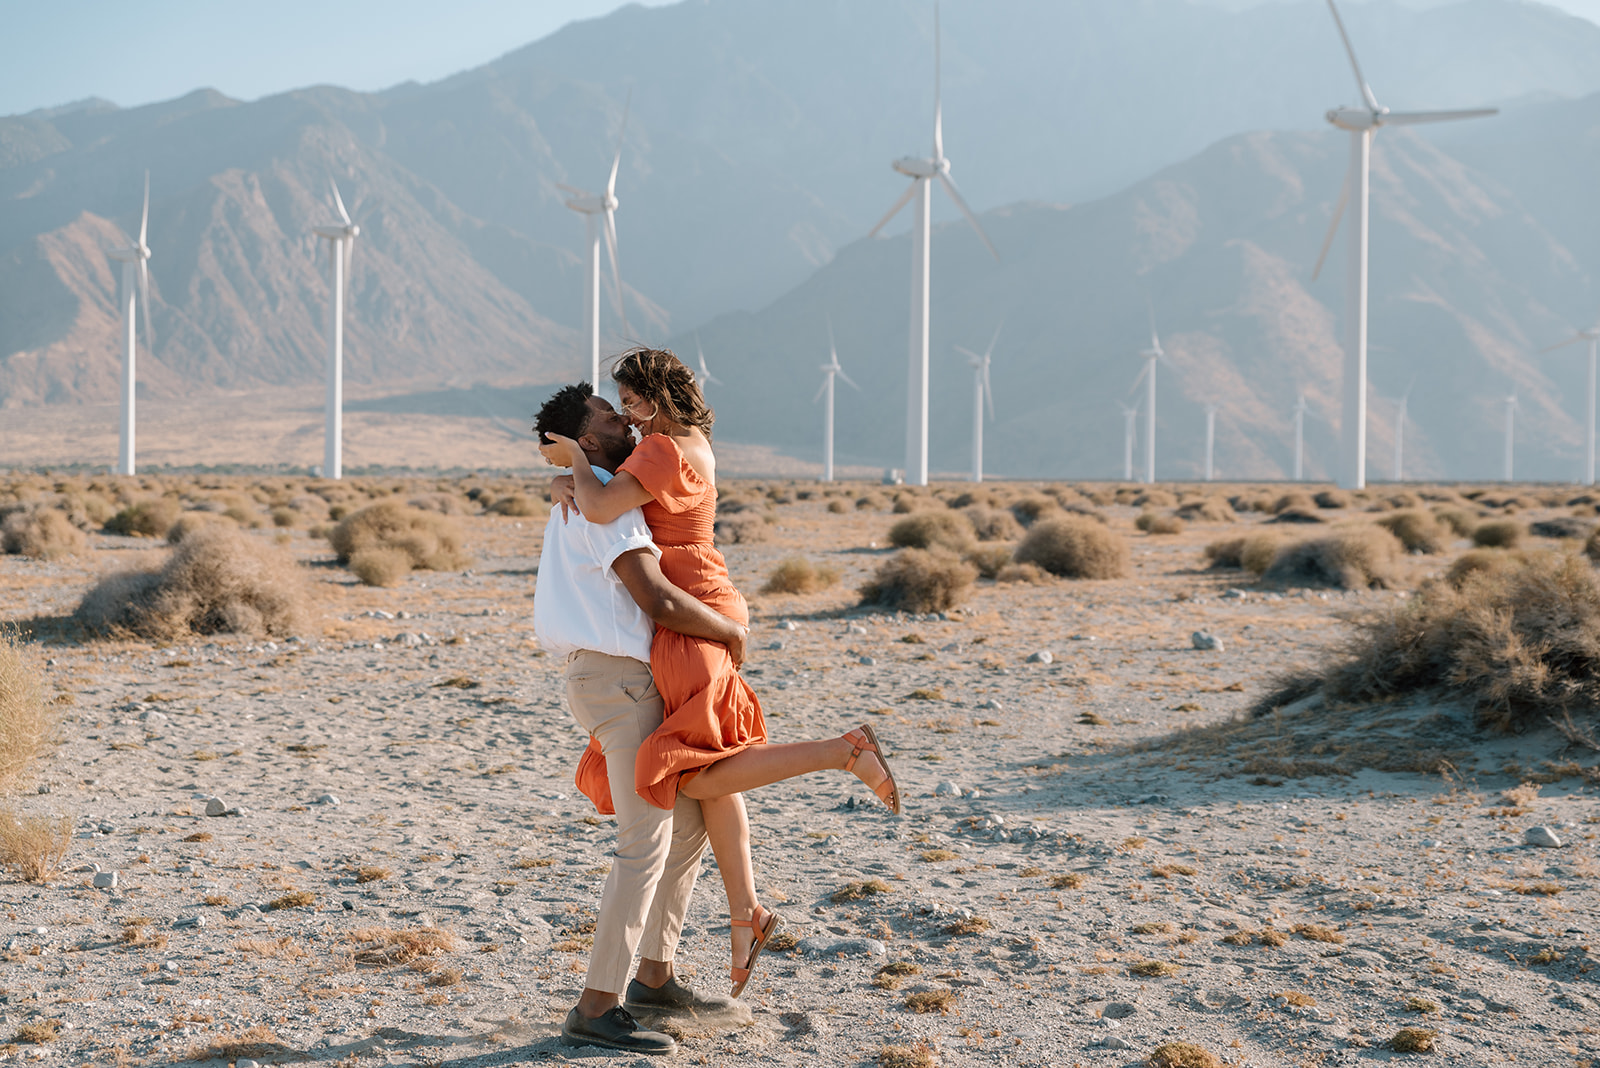 Man and woman embrace in the Palm Springs desert